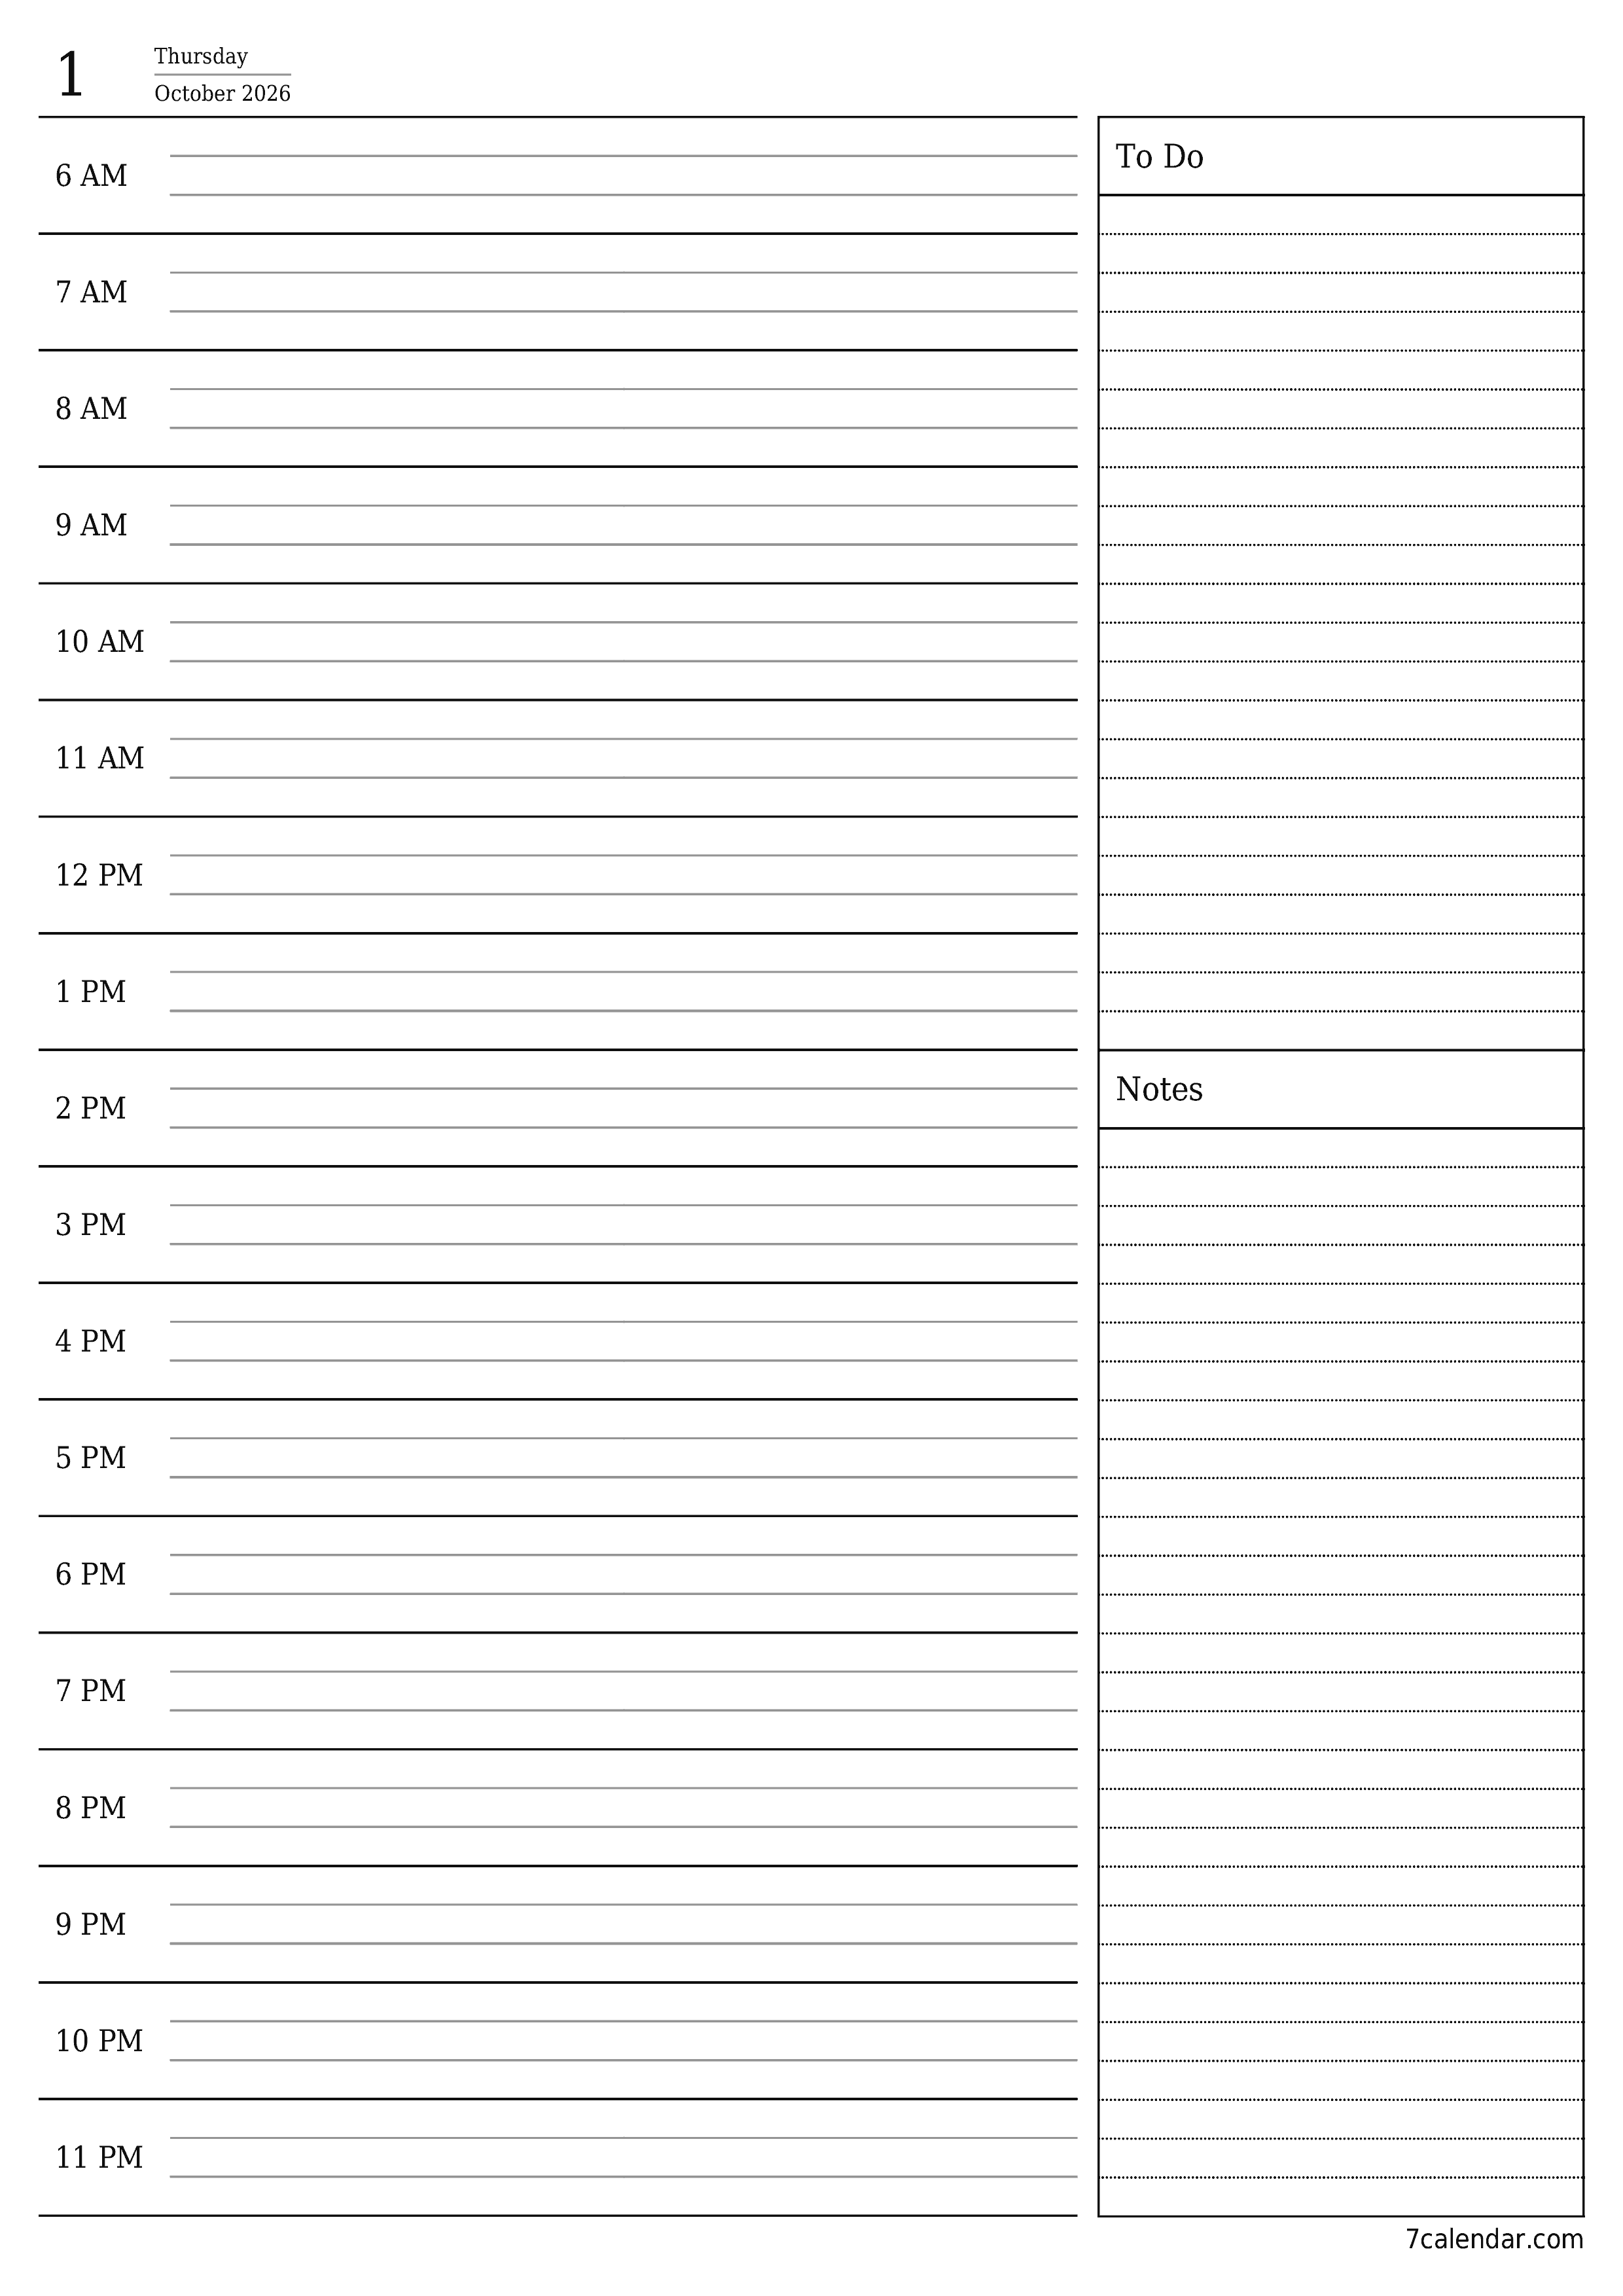 printable wall template free vertical Daily planner calendar October (Oct) 2026